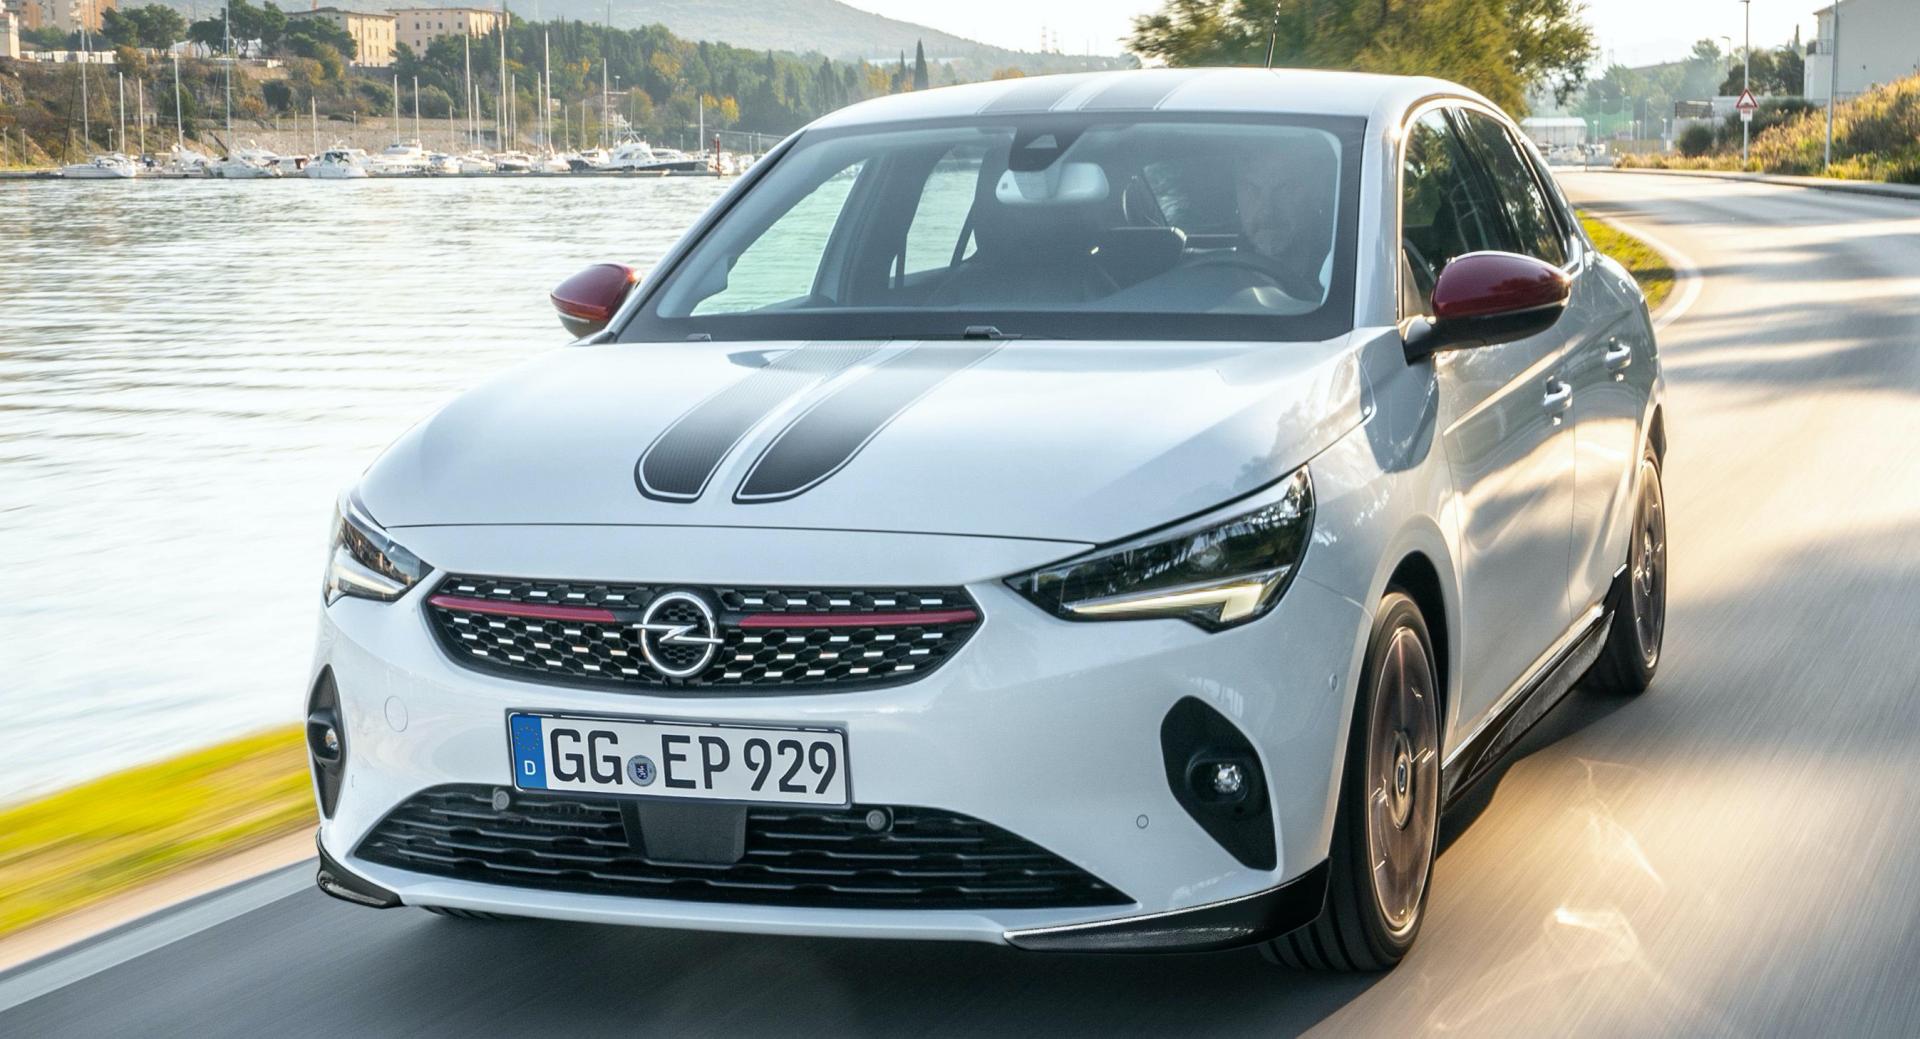 2020 Opel Corsa Offers More Personalization Options Than Ever